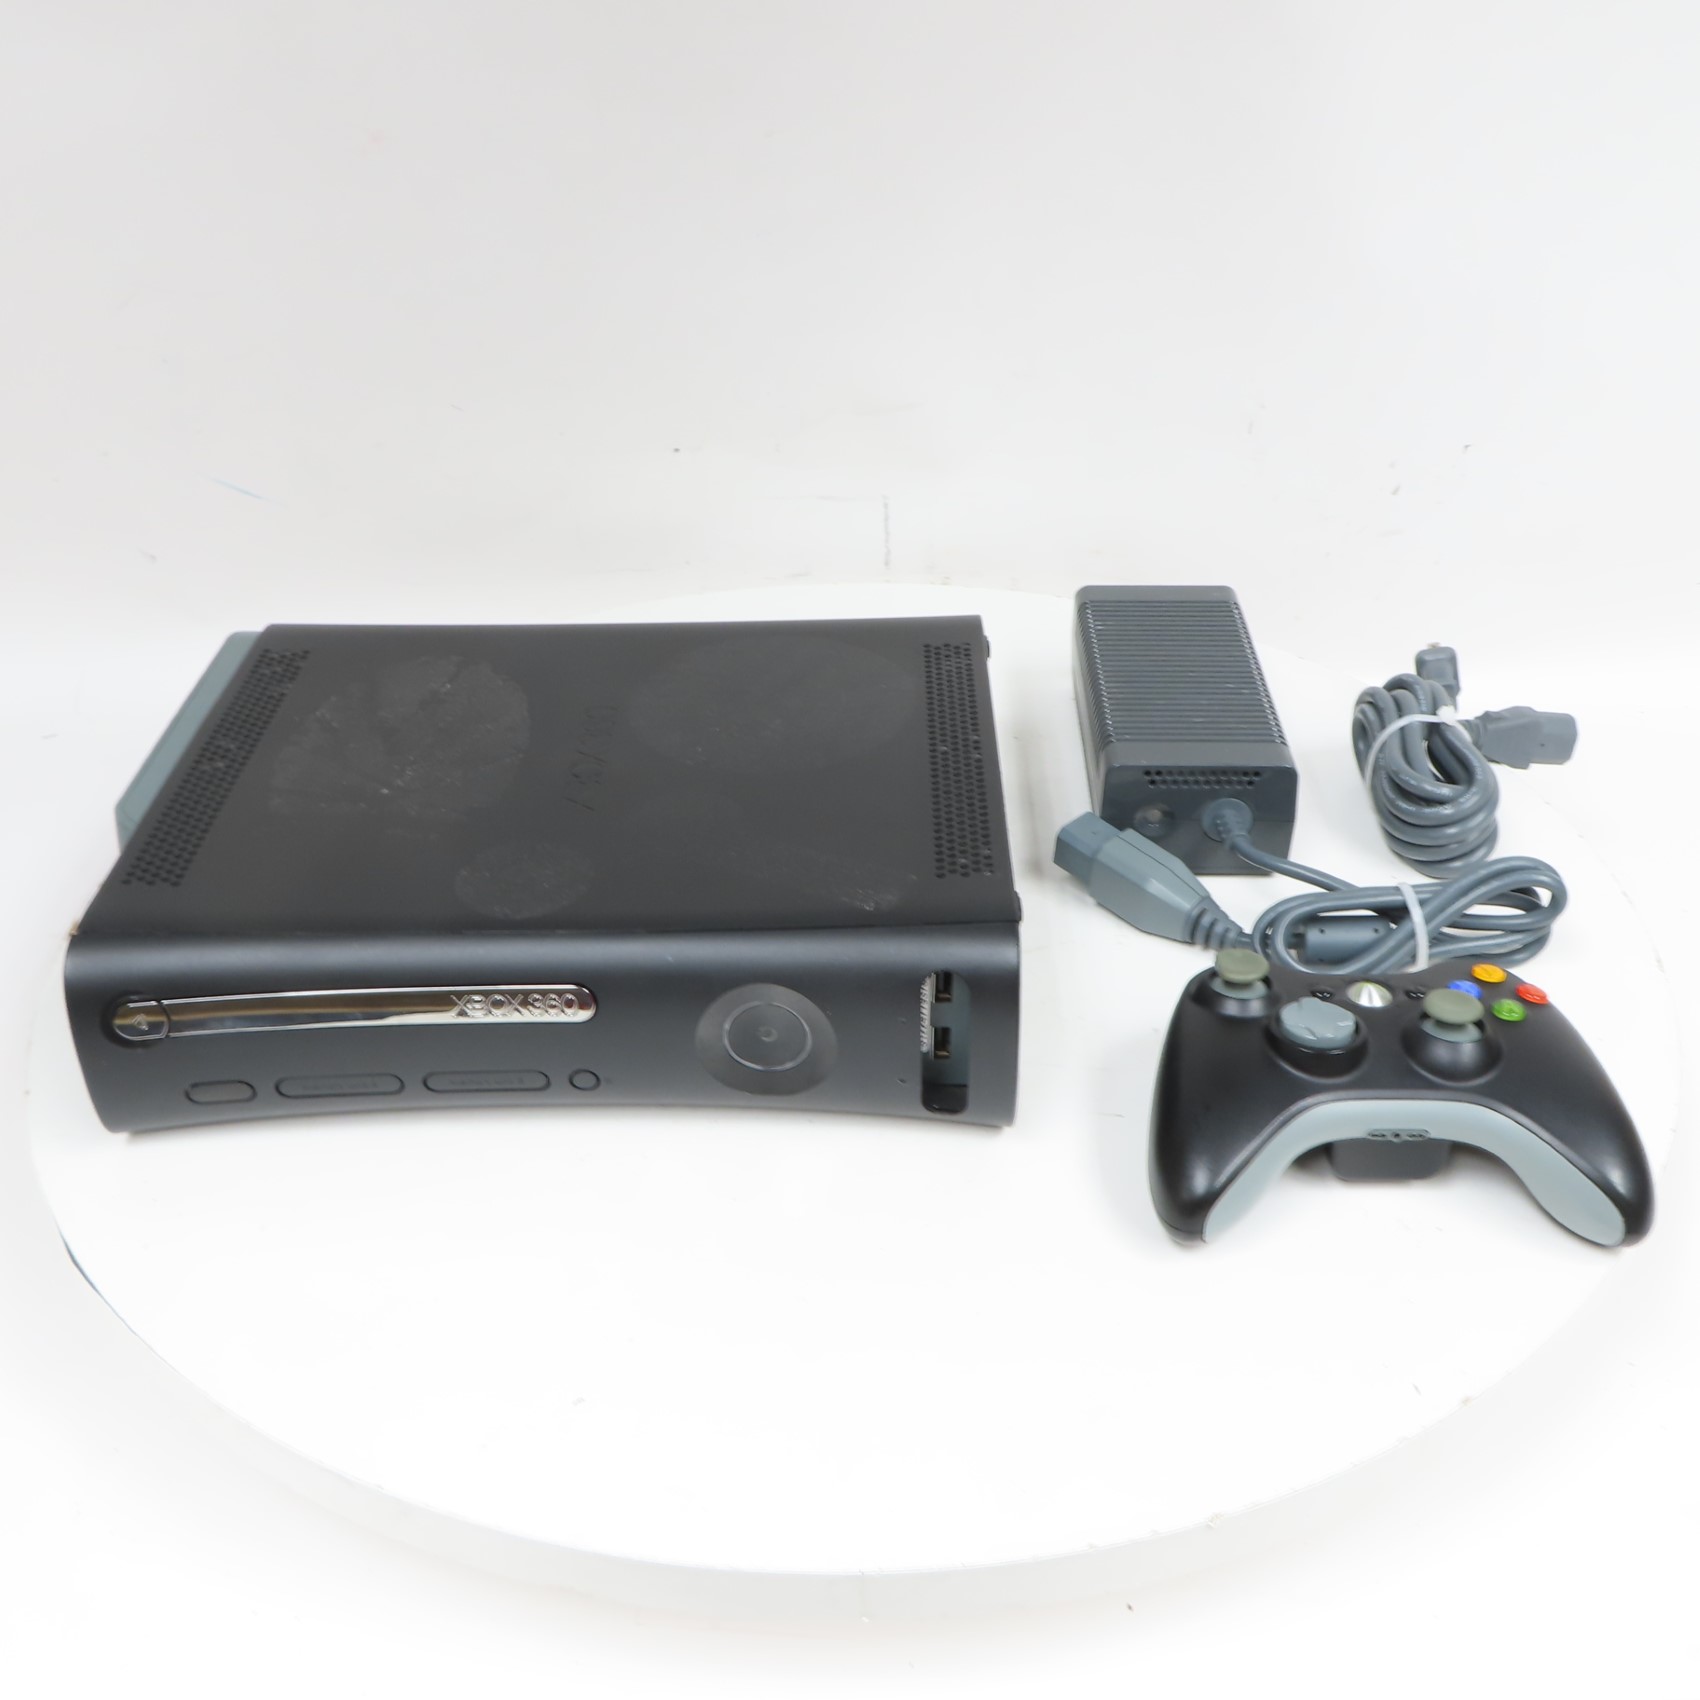 New and used Microsoft Xbox 360 Elite Gaming Consoles for sale, Facebook  Marketplace